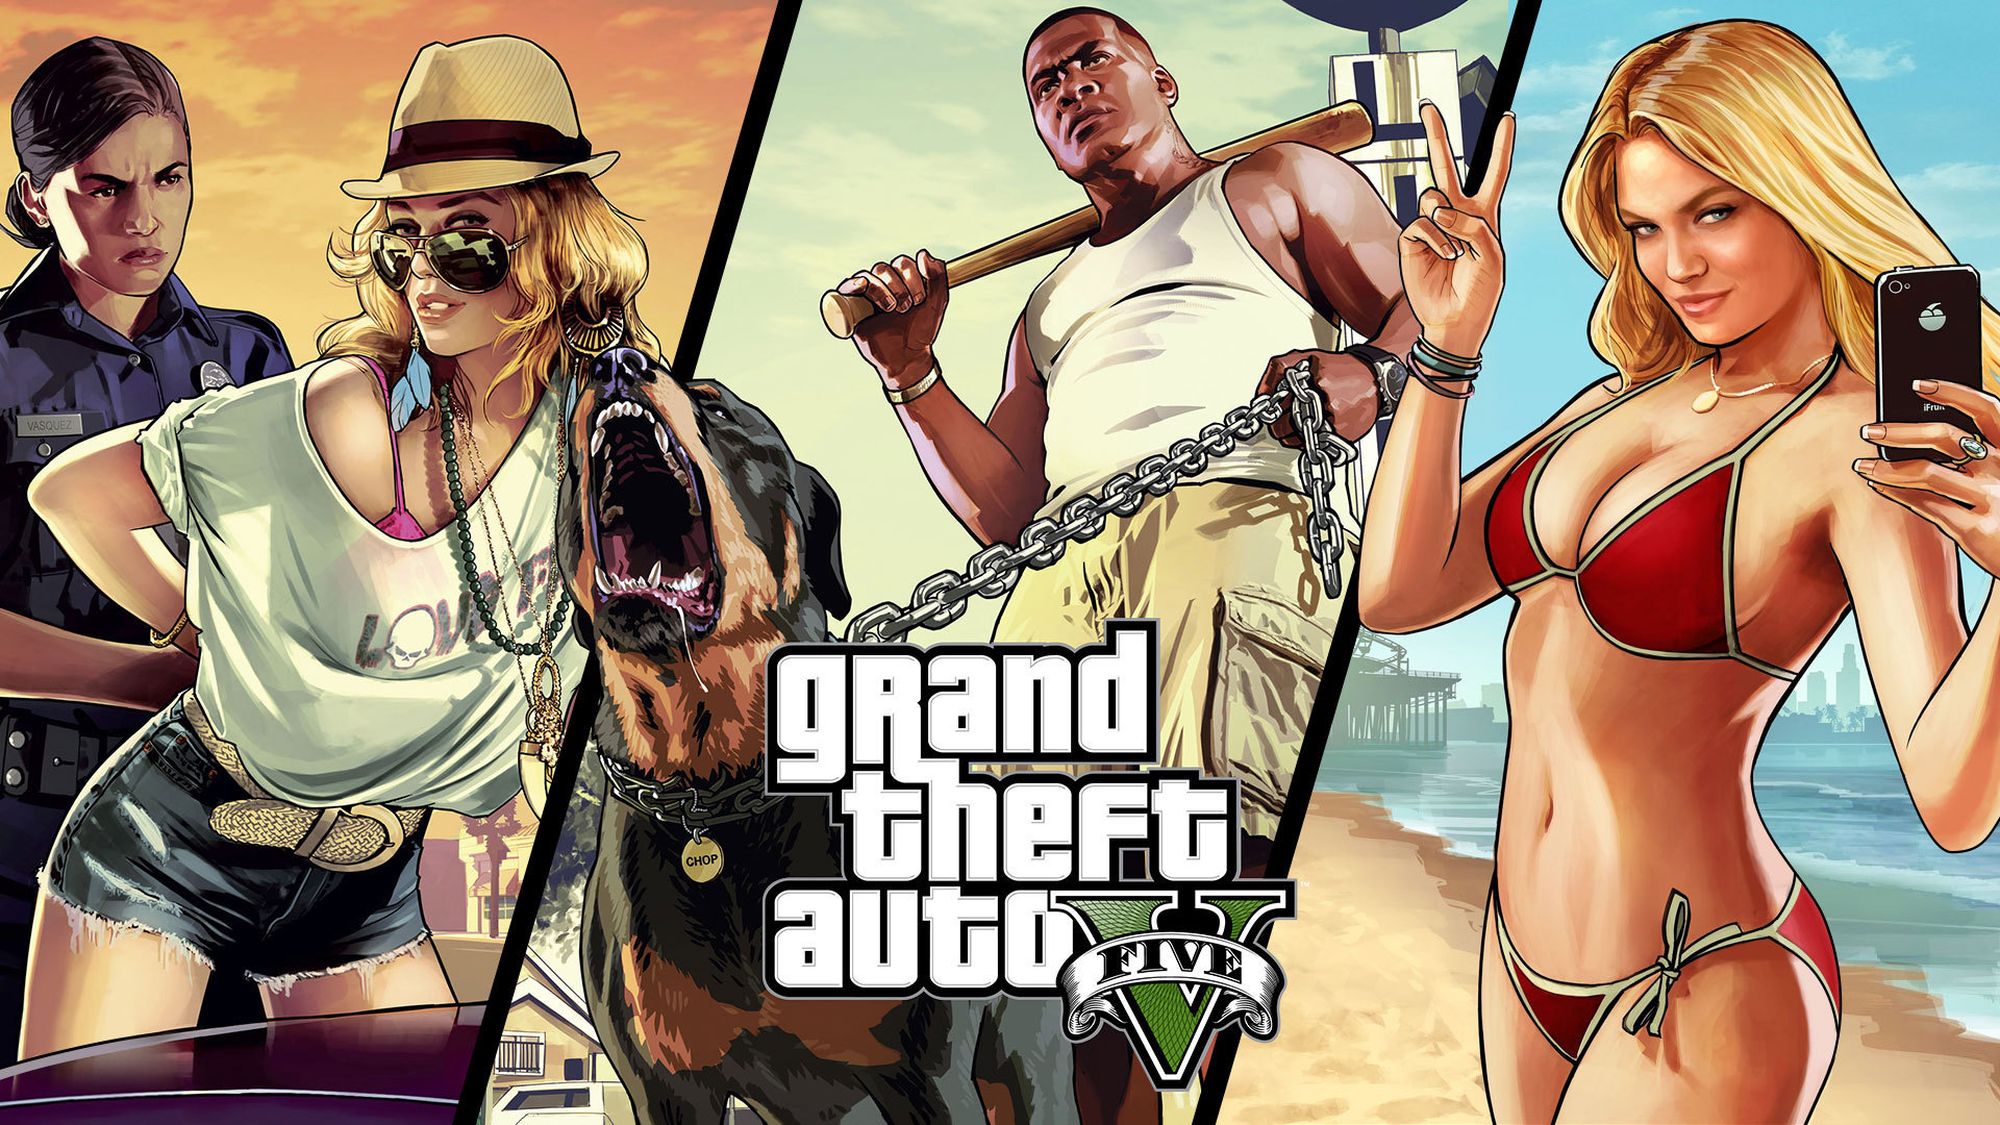 watch, grand theft auto v, bikini, video game, baseball bat, beach, belt, blonde, blue eyes, brown hair, chain, dog, earrings, franklin clinton, hat, long hair, necklace, peace sign, phone, police, ring, shorts, sky, smile, sunglasses, grand theft auto cellphone